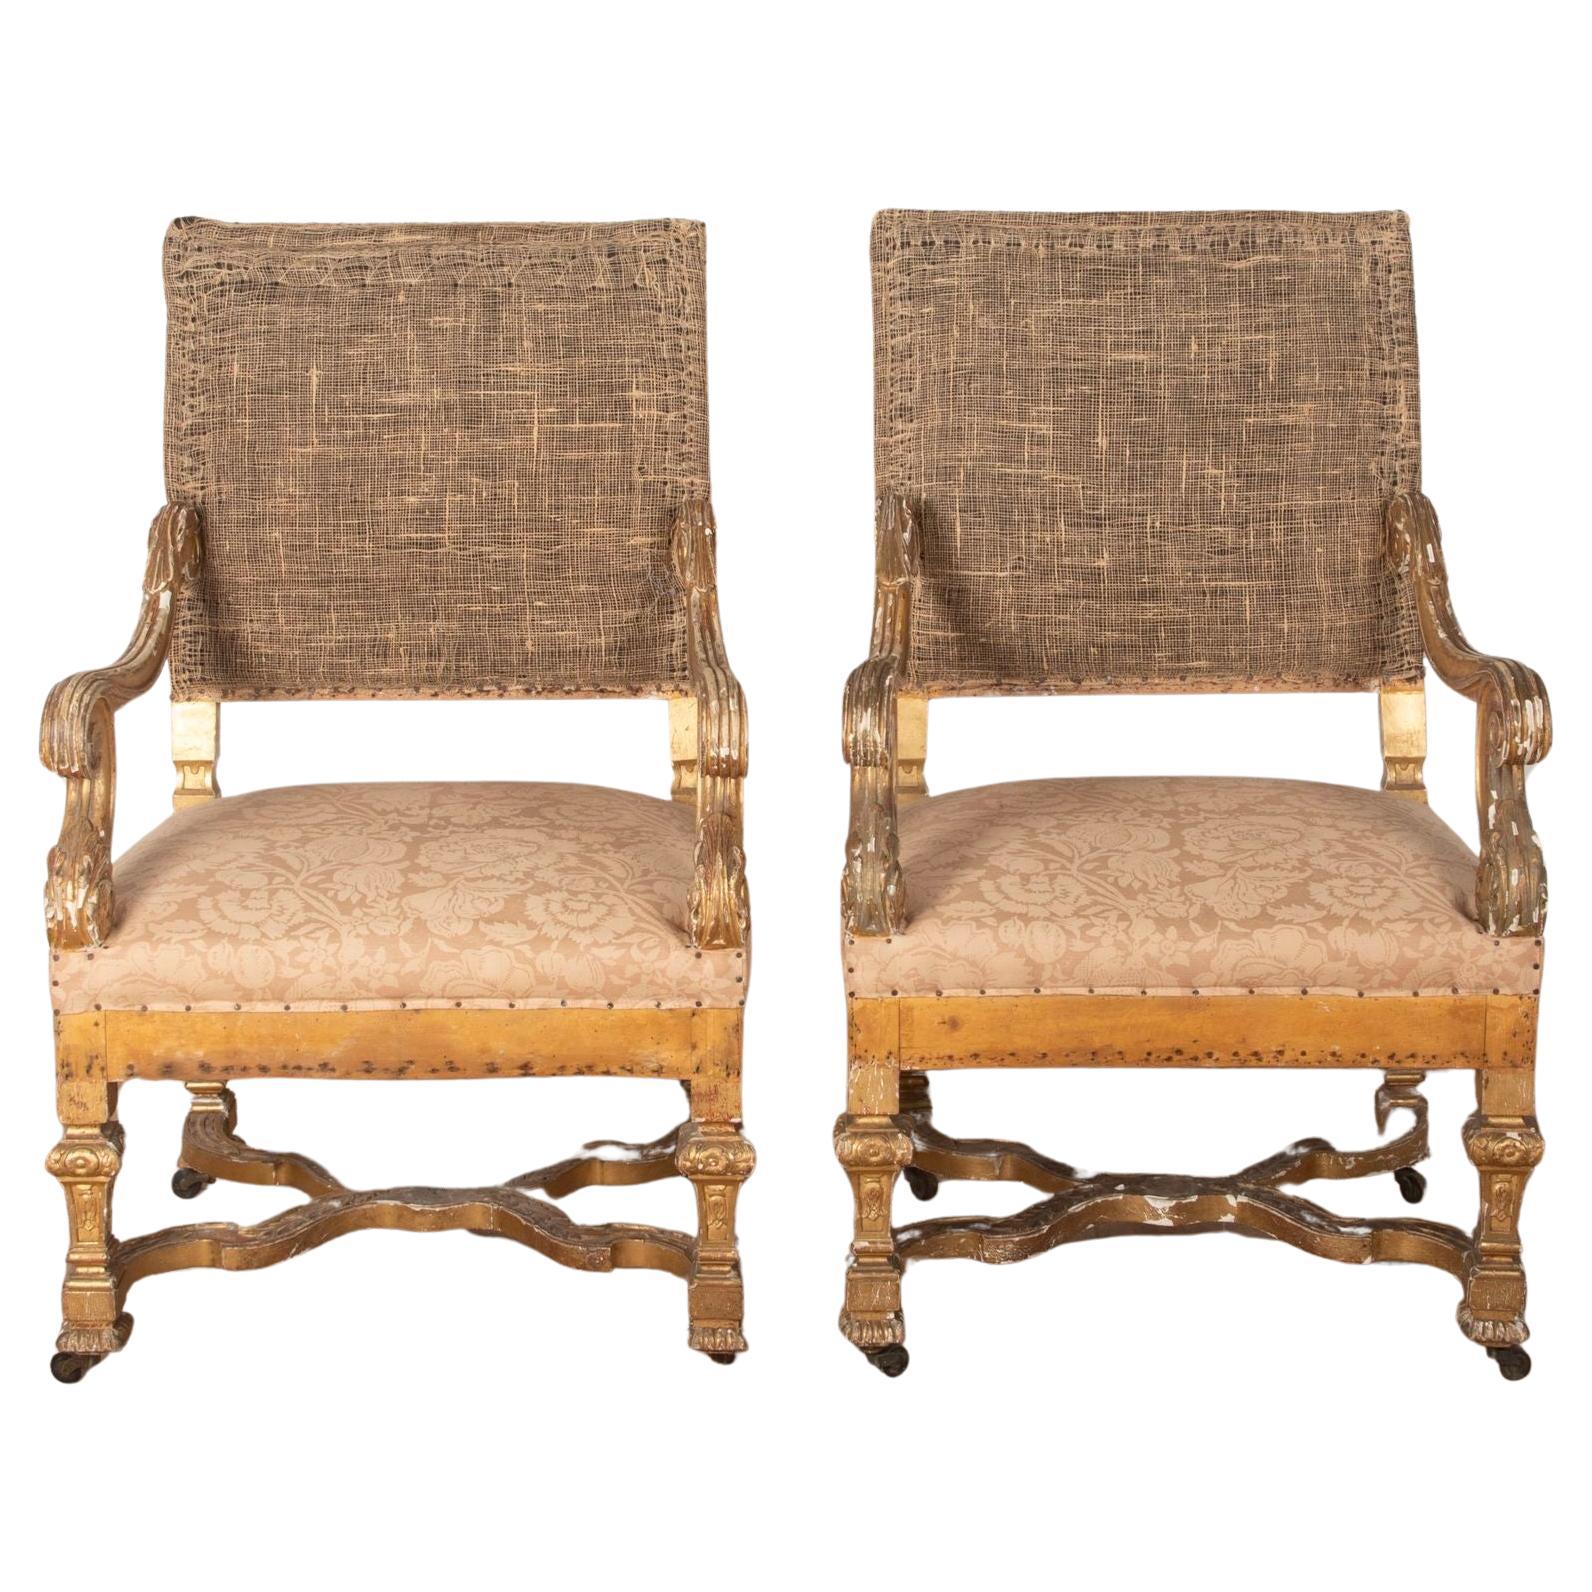 Pair of Louis XIV Style Giltwood Armchairs